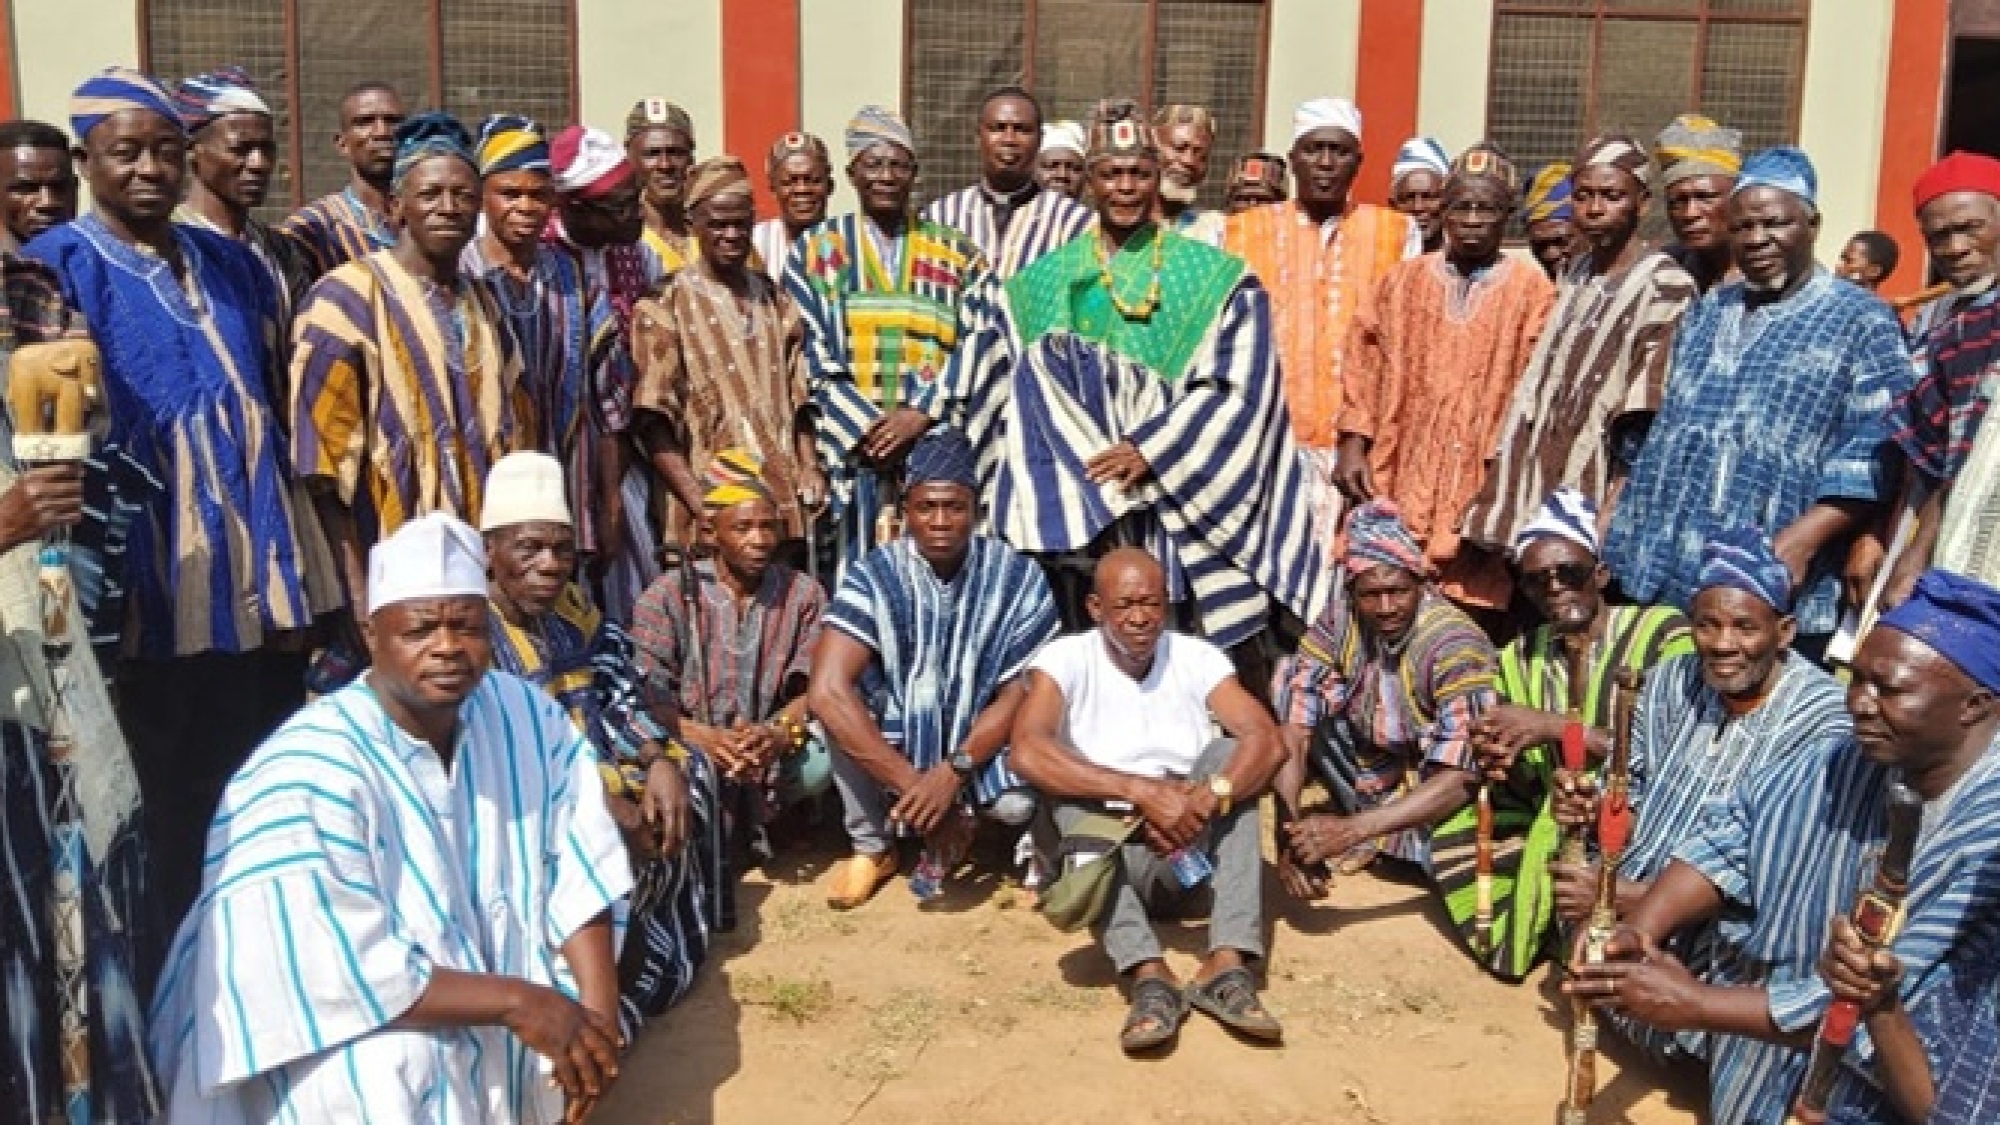 Chieftaincy Is Ordained By God - Sawla Area Head Asserts